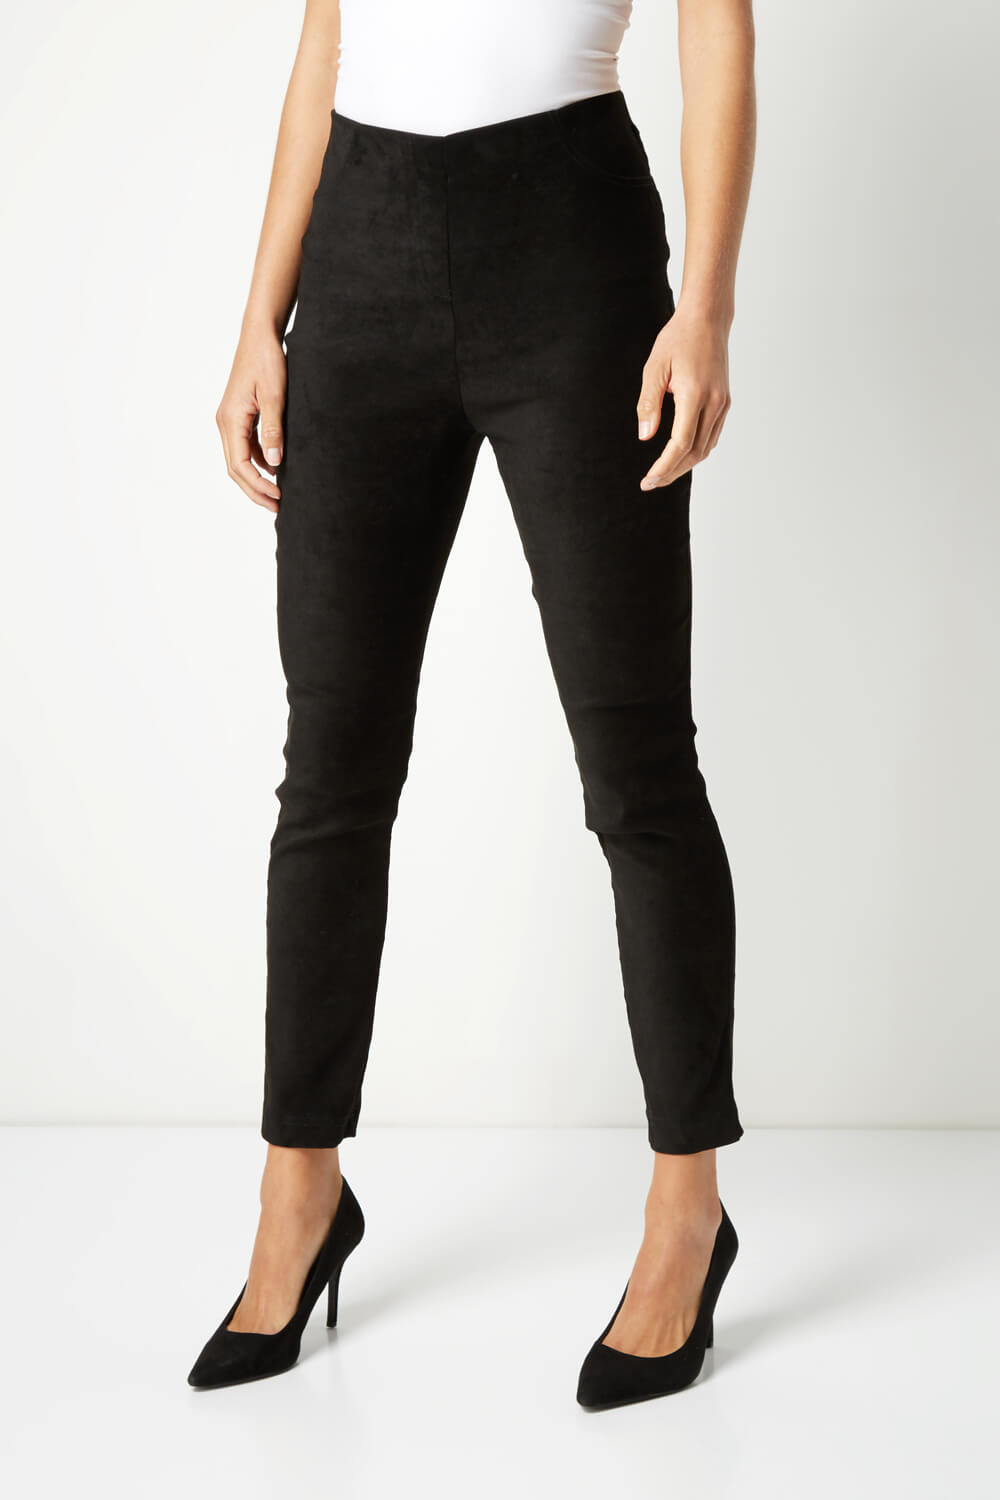 Black Full Length Suedette Stretch Trousers, Image 2 of 5